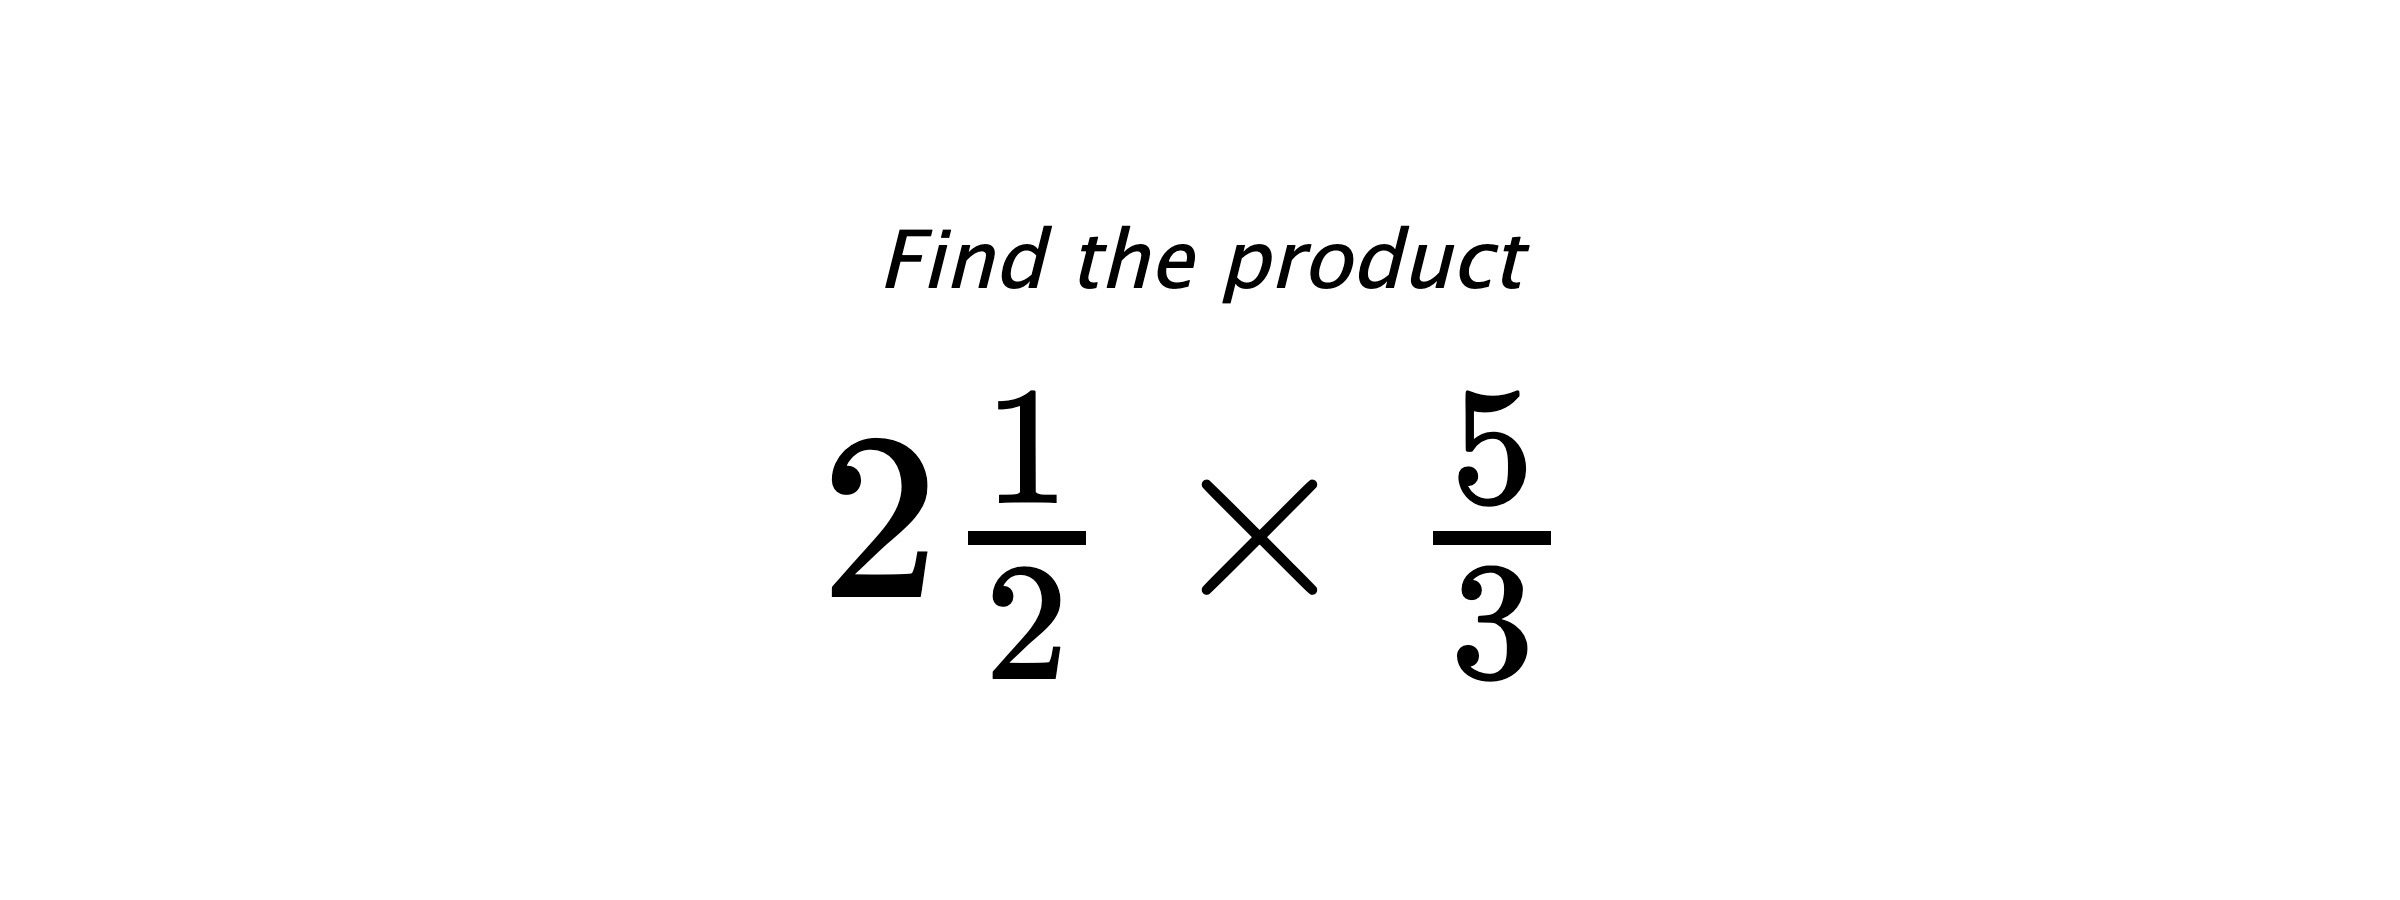 Find the product $ 2\frac{1}{2} \times \frac{5}{3} $